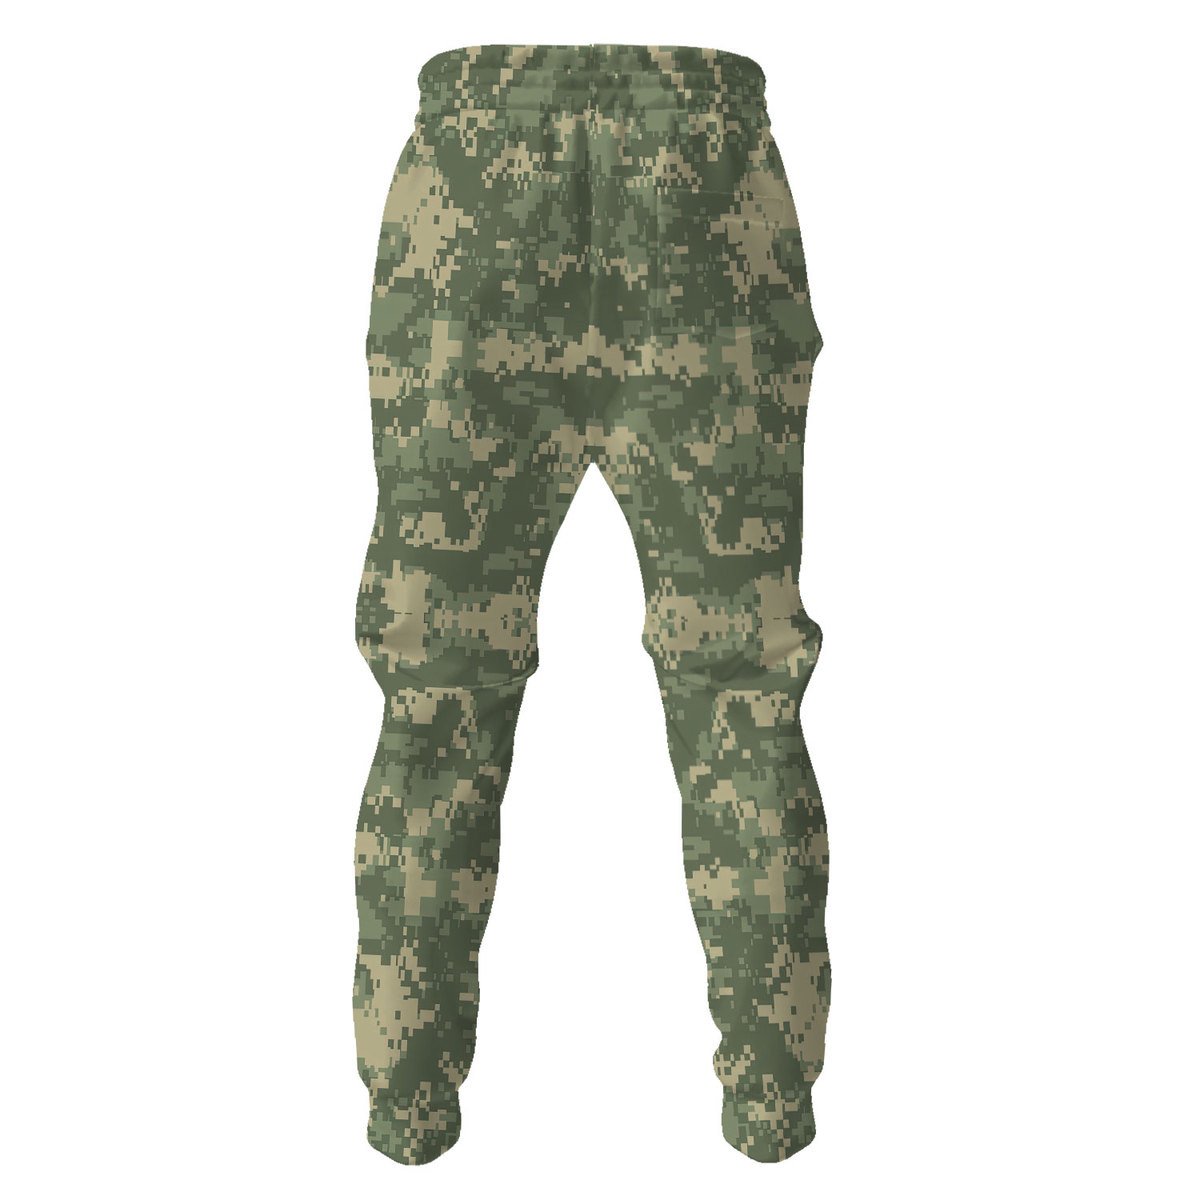 American ACU or Universal Camouflage Pattern (UCP) CAMO Pant